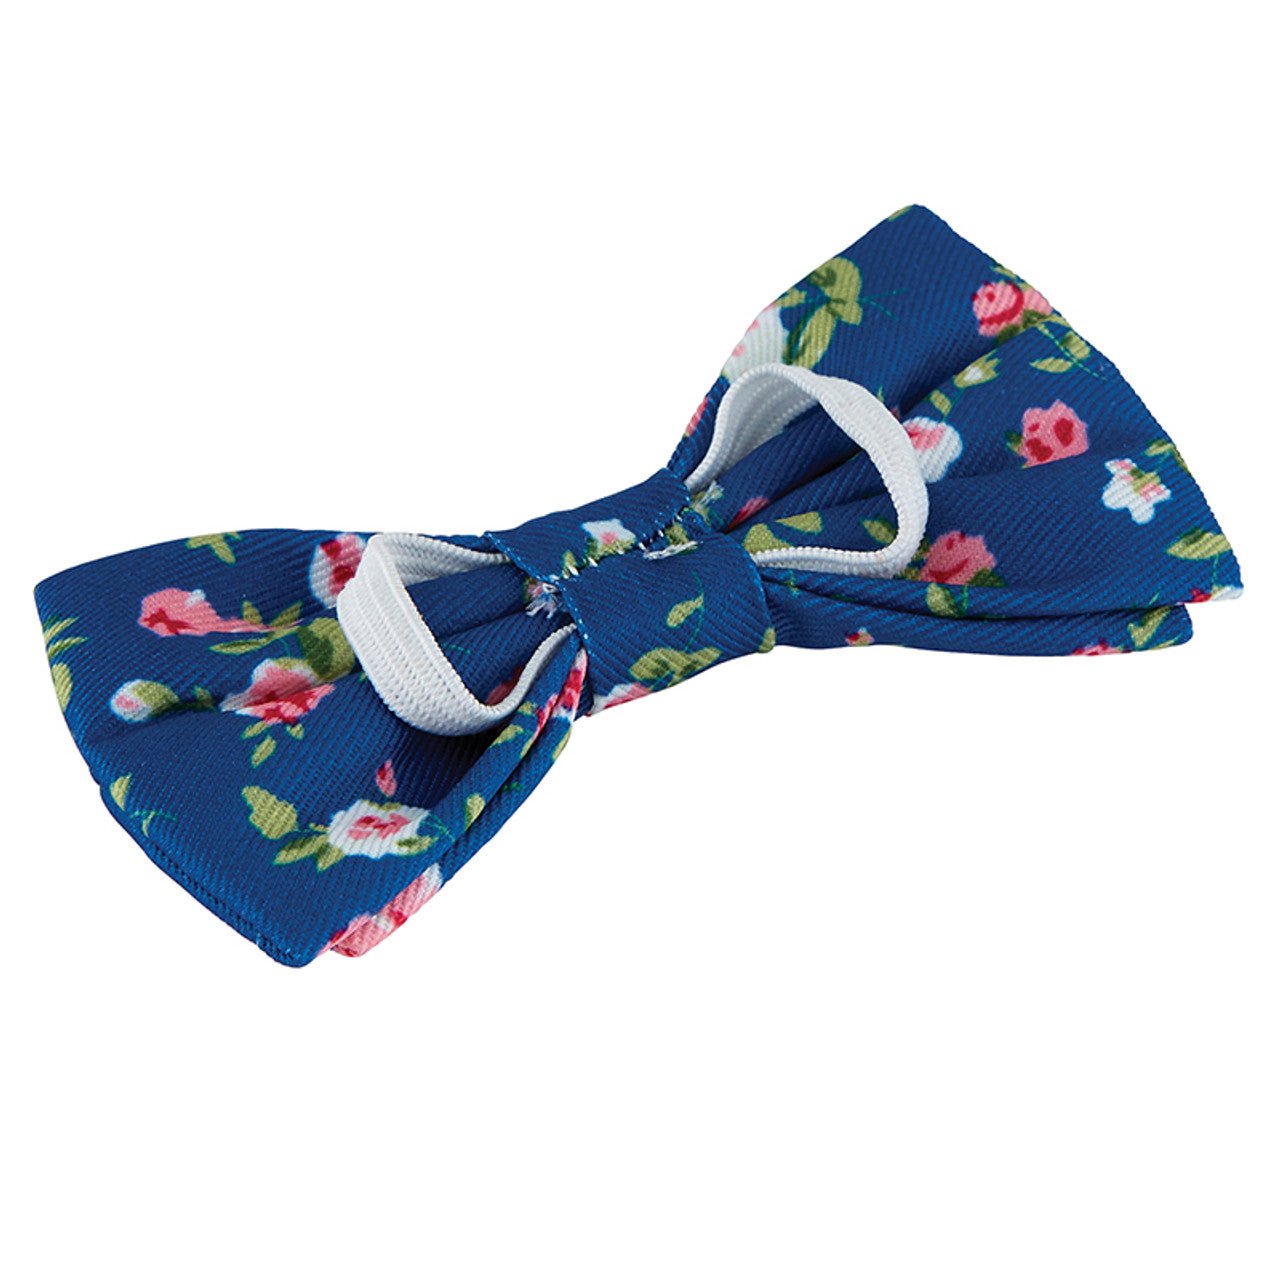 Blue Floral Pet Bow Tie | Dog or Cat Fancy Bowtie Attaches to Collar